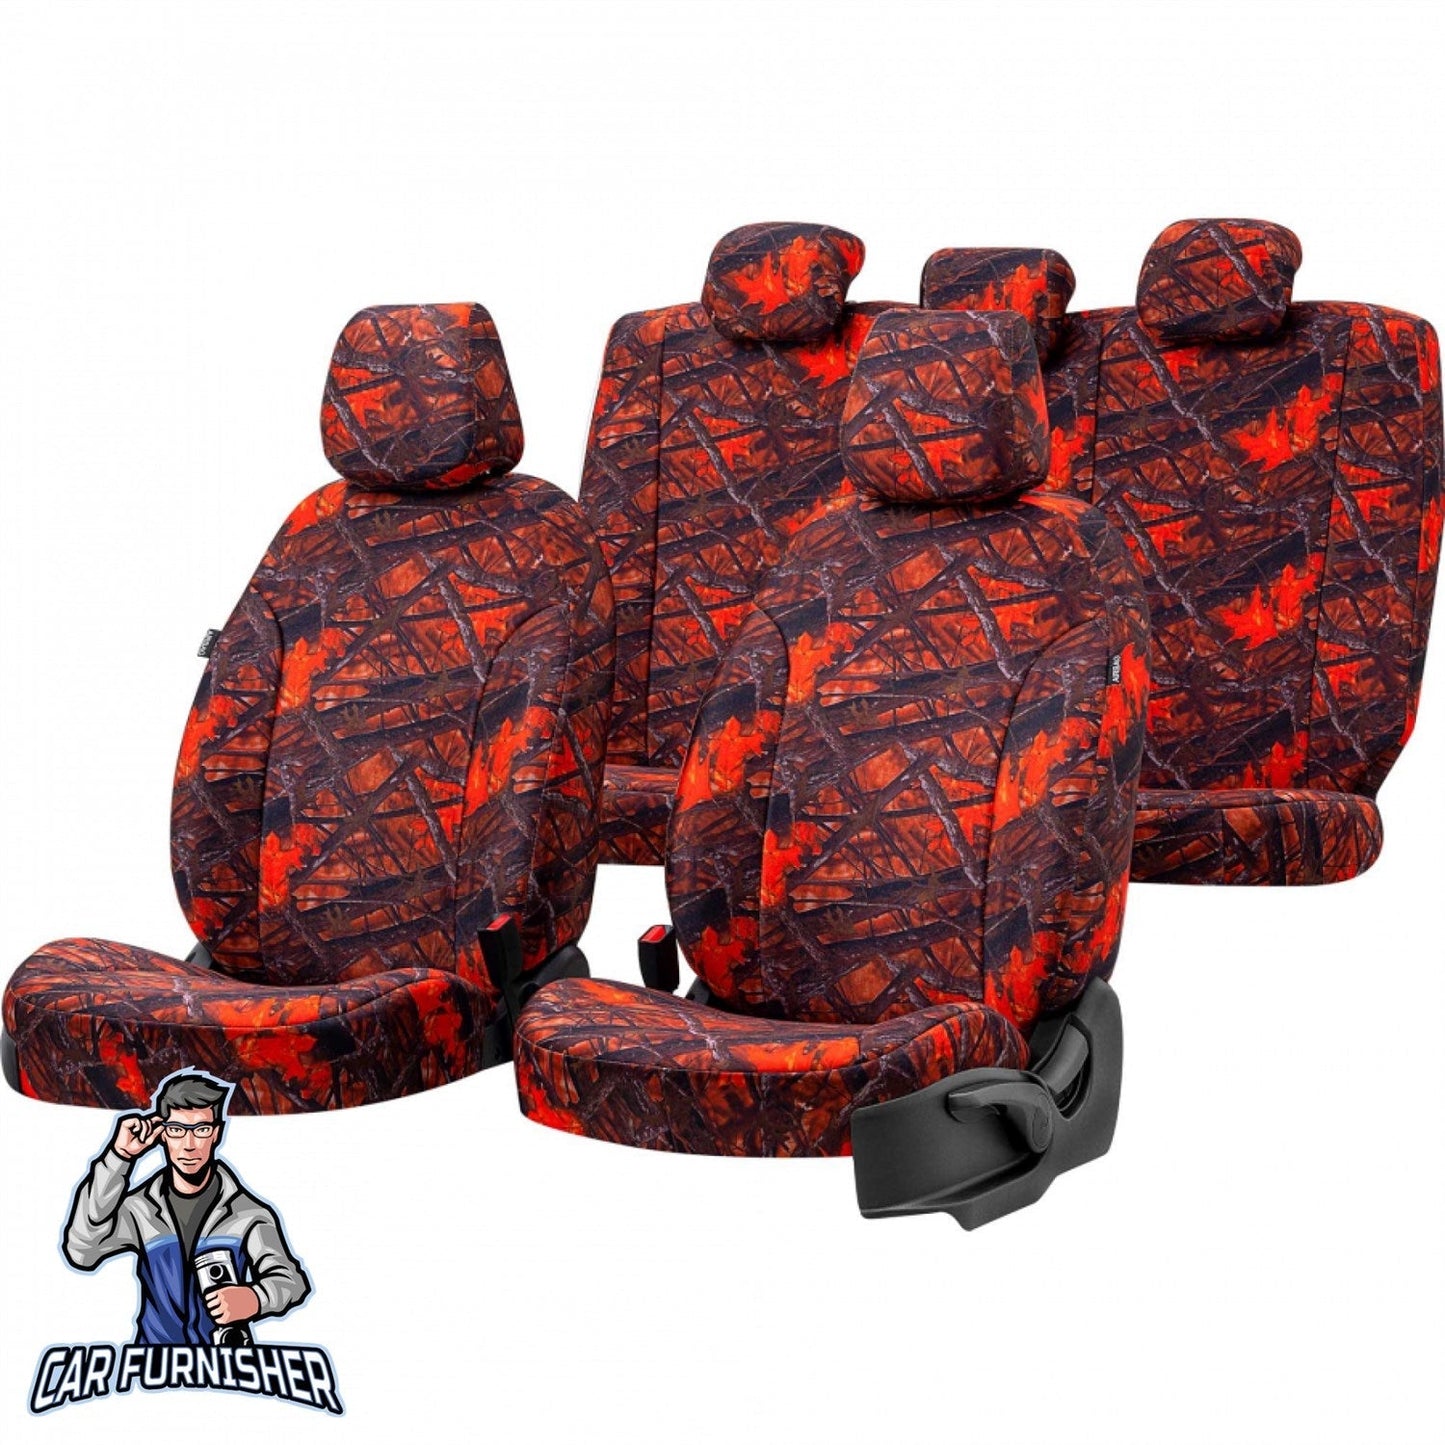 Smart ForFour Seat Covers Camouflage Waterproof Design Sahara Camo Waterproof Fabric